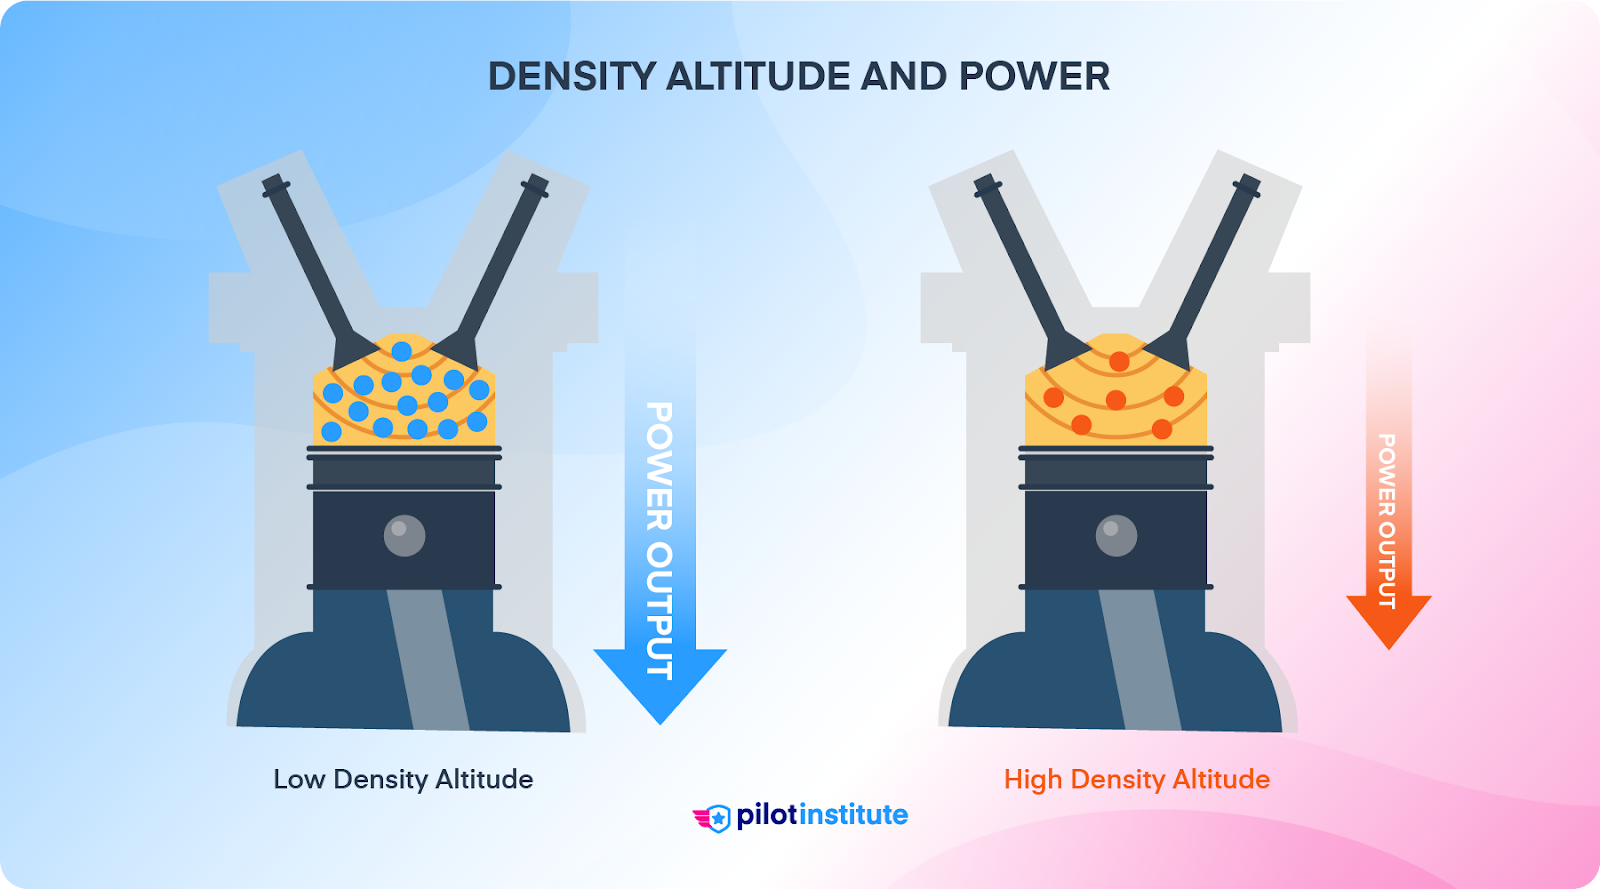 Two engine cylinders showing how increased density altitude decreases power output.